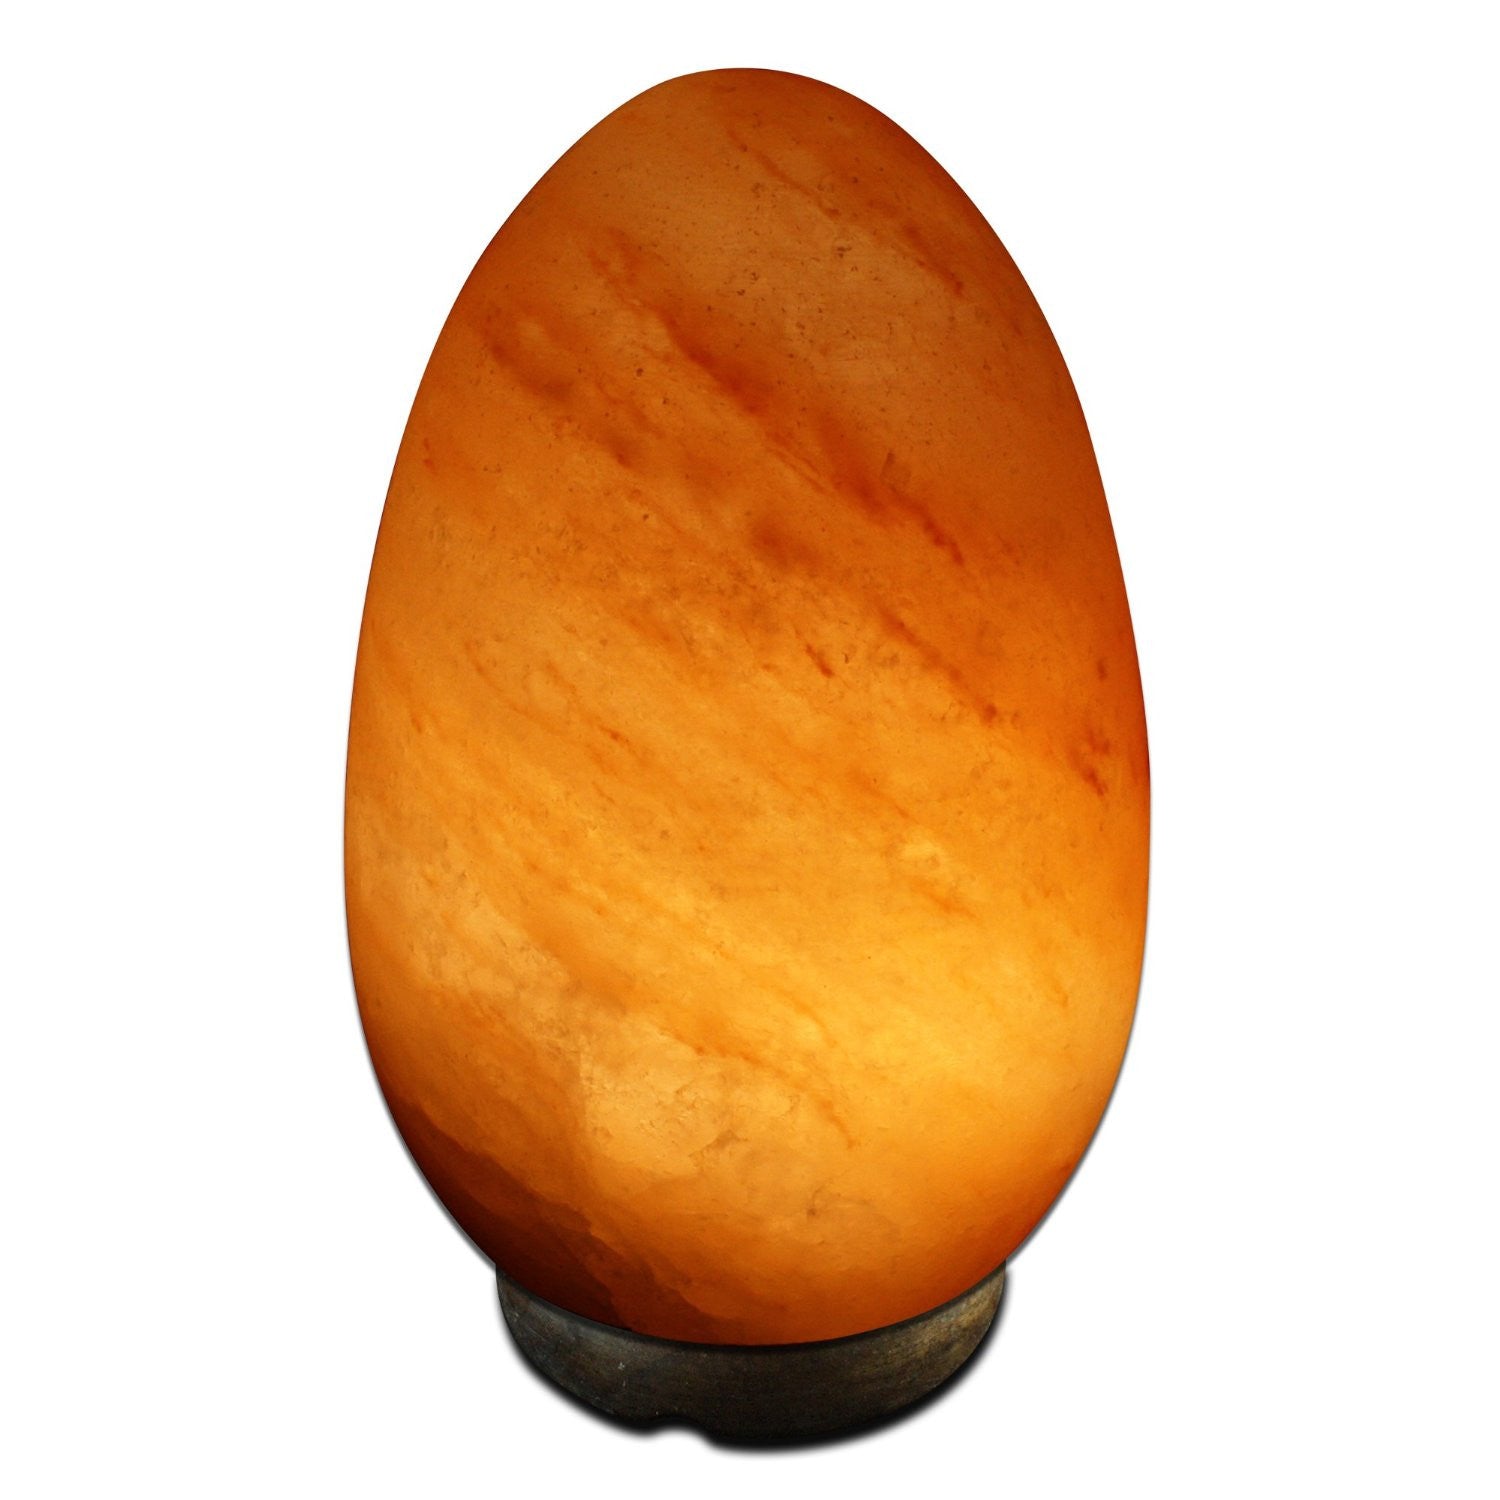 Lumière de Sel® “Shaped” Himalayan Crystal Salt Lamps - IN STORE ONLY